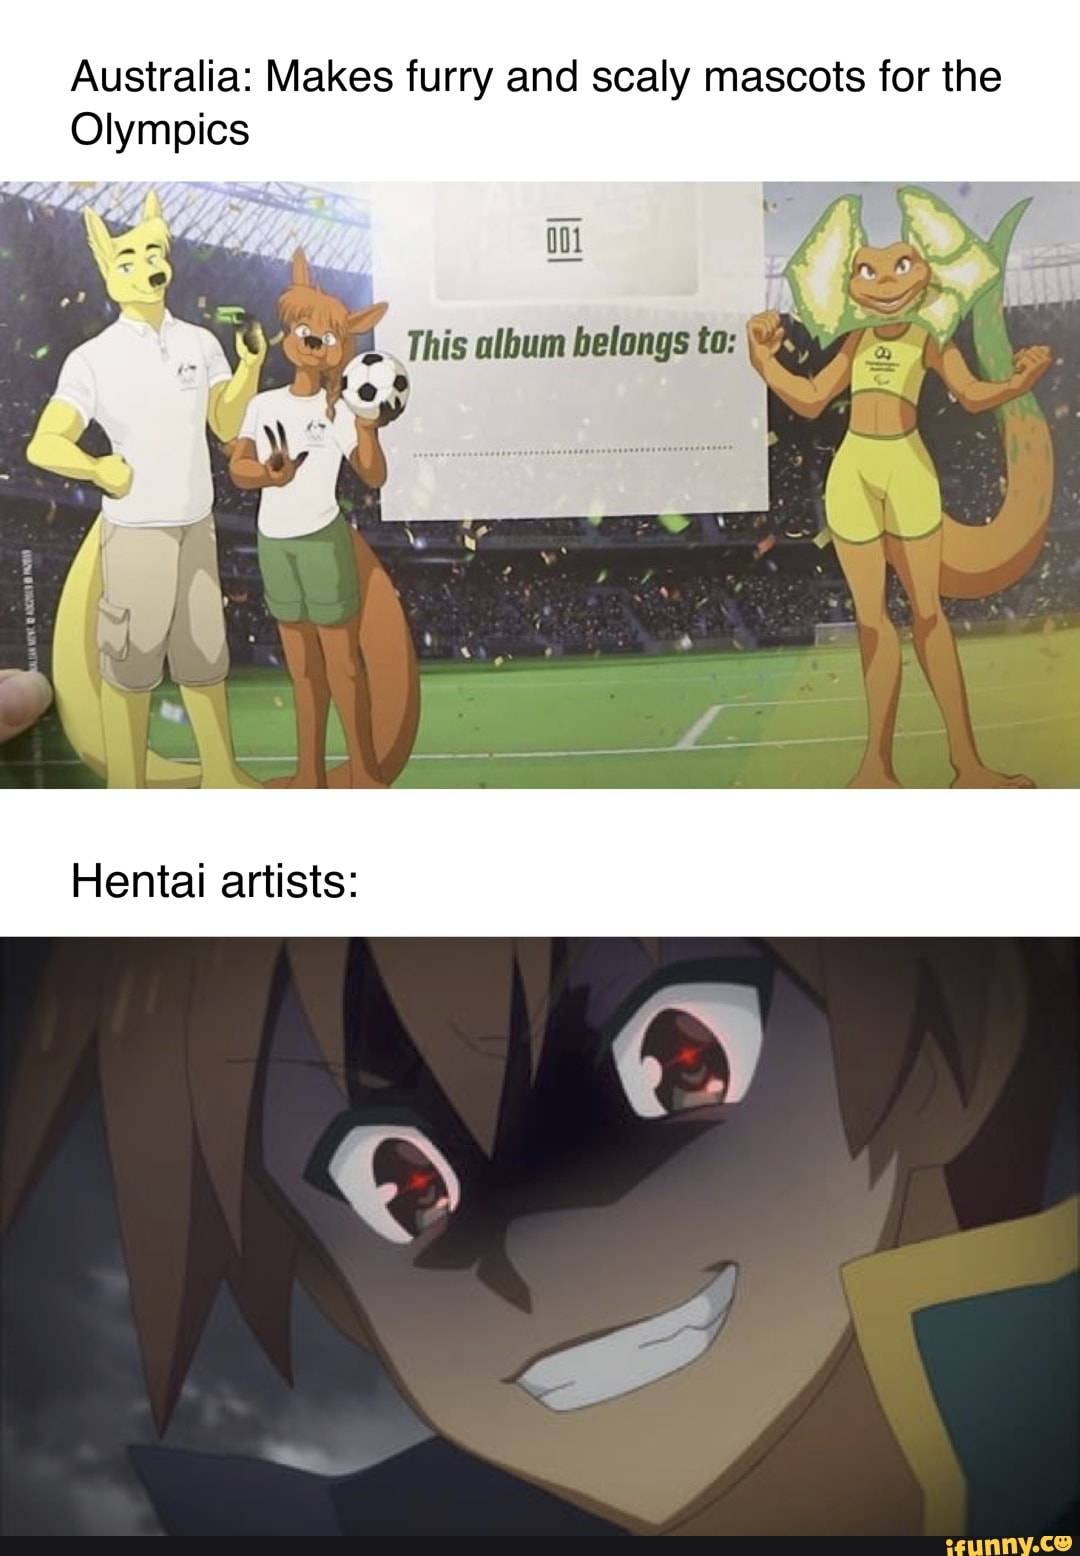 vejspærring pegs Gentage sig Australia: Makes furry and scaly mascots for the Olympics Hentai artists: -  )